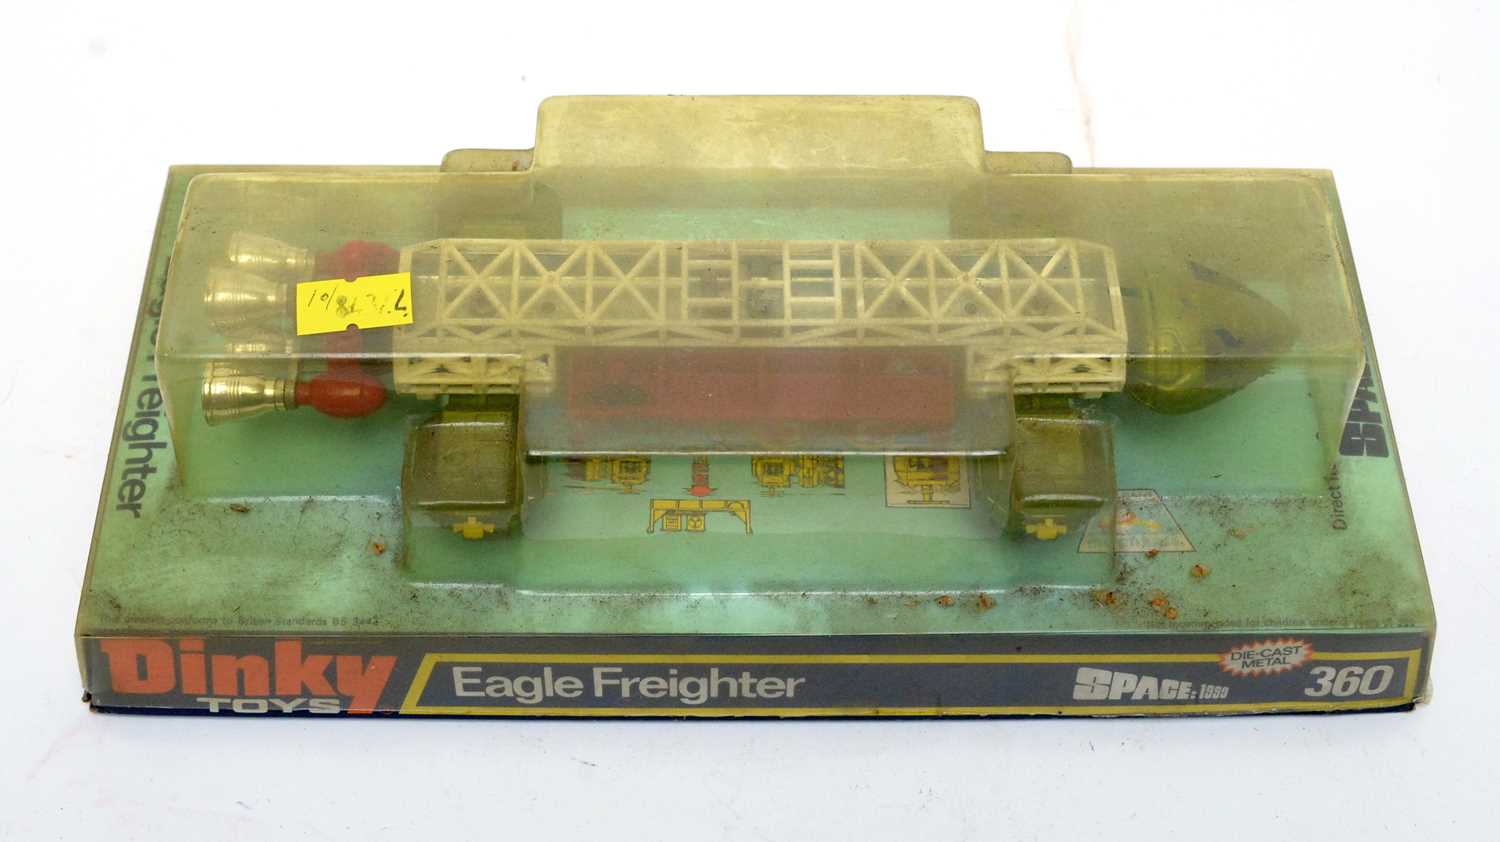 Lot 1 - Dinky Toys Eagle Freighter, Space:1999, 360, boxed.